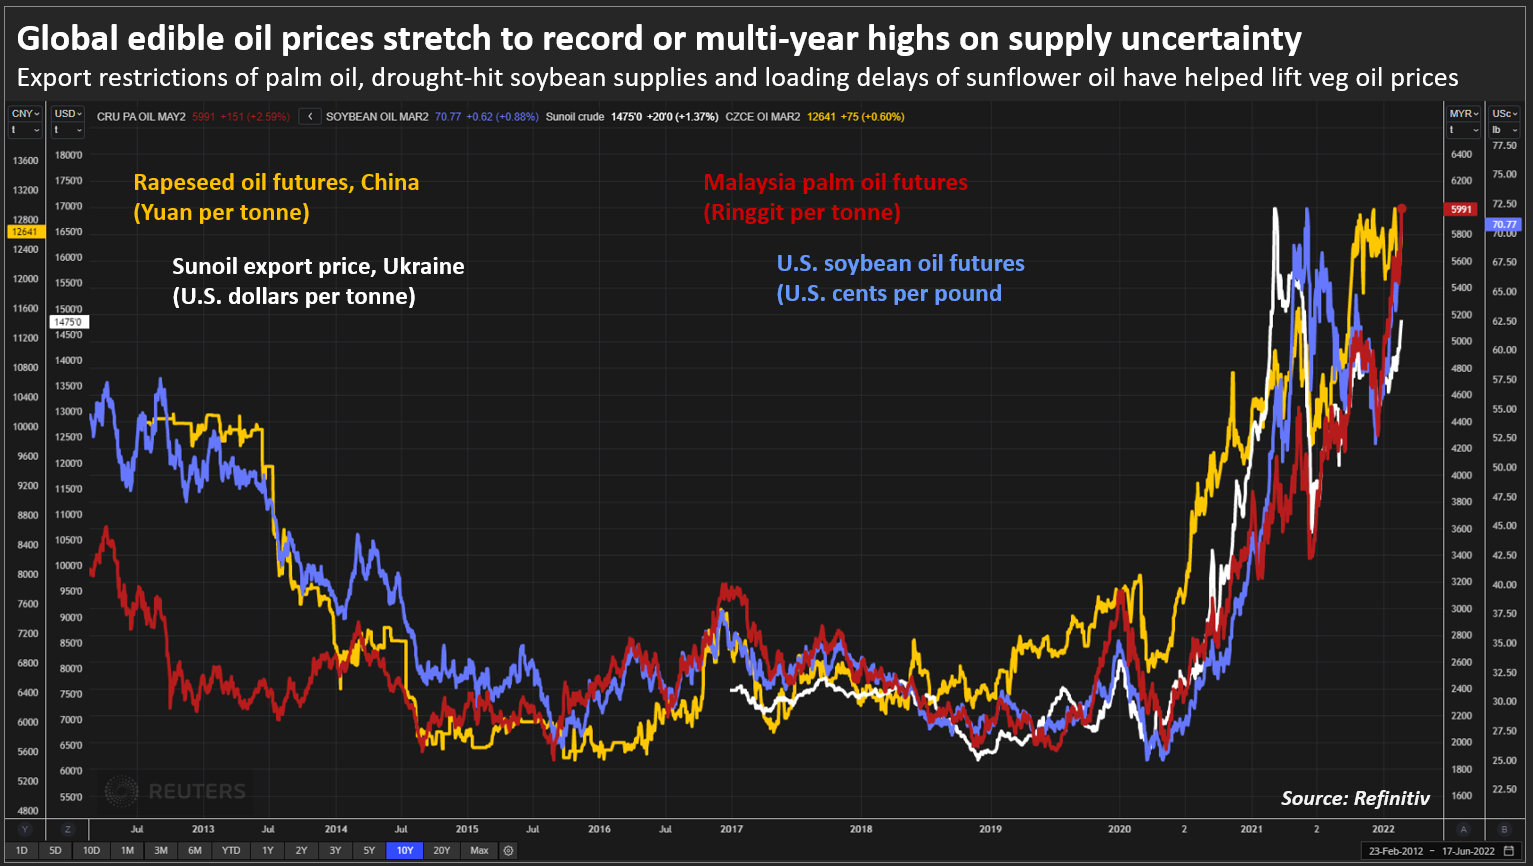 Global edible oil prices stretch to record or multi-year highs on supply uncertainty